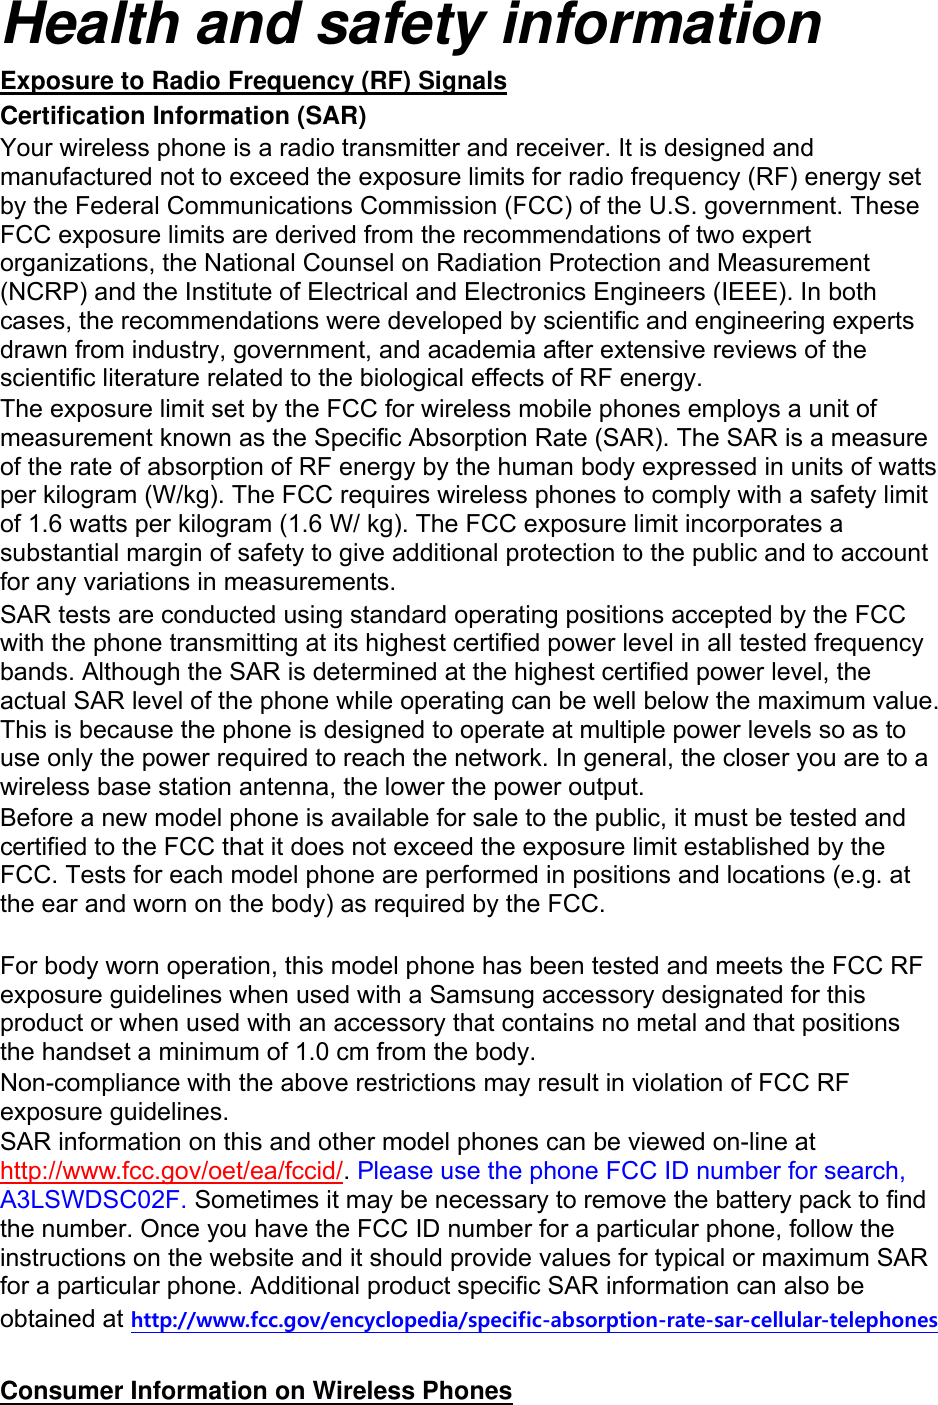 Health and safety information Exposure to Radio Frequency (RF) Signals Certification Information (SAR) Your wireless phone is a radio transmitter and receiver. It is designed and manufactured not to exceed the exposure limits for radio frequency (RF) energy set by the Federal Communications Commission (FCC) of the U.S. government. These FCC exposure limits are derived from the recommendations of two expert organizations, the National Counsel on Radiation Protection and Measurement (NCRP) and the Institute of Electrical and Electronics Engineers (IEEE). In both cases, the recommendations were developed by scientific and engineering experts drawn from industry, government, and academia after extensive reviews of the scientific literature related to the biological effects of RF energy. The exposure limit set by the FCC for wireless mobile phones employs a unit of measurement known as the Specific Absorption Rate (SAR). The SAR is a measure of the rate of absorption of RF energy by the human body expressed in units of watts per kilogram (W/kg). The FCC requires wireless phones to comply with a safety limit of 1.6 watts per kilogram (1.6 W/ kg). The FCC exposure limit incorporates a substantial margin of safety to give additional protection to the public and to account for any variations in measurements. SAR tests are conducted using standard operating positions accepted by the FCC with the phone transmitting at its highest certified power level in all tested frequency bands. Although the SAR is determined at the highest certified power level, the actual SAR level of the phone while operating can be well below the maximum value. This is because the phone is designed to operate at multiple power levels so as to use only the power required to reach the network. In general, the closer you are to a wireless base station antenna, the lower the power output. Before a new model phone is available for sale to the public, it must be tested and certified to the FCC that it does not exceed the exposure limit established by the FCC. Tests for each model phone are performed in positions and locations (e.g. at the ear and worn on the body) as required by the FCC.      For body worn operation, this model phone has been tested and meets the FCC RF exposure guidelines when used with a Samsung accessory designated for this product or when used with an accessory that contains no metal and that positions the handset a minimum of 1.0 cm from the body.   Non-compliance with the above restrictions may result in violation of FCC RF exposure guidelines. SAR information on this and other model phones can be viewed on-line at http://www.fcc.gov/oet/ea/fccid/. Please use the phone FCC ID number for search, A3LSWDSC02F. Sometimes it may be necessary to remove the battery pack to find the number. Once you have the FCC ID number for a particular phone, follow the instructions on the website and it should provide values for typical or maximum SAR for a particular phone. Additional product specific SAR information can also be obtained at http://www.fcc.gov/encyclopedia/specific-absorption-rate-sar-cellular-telephones  Consumer Information on Wireless Phones 